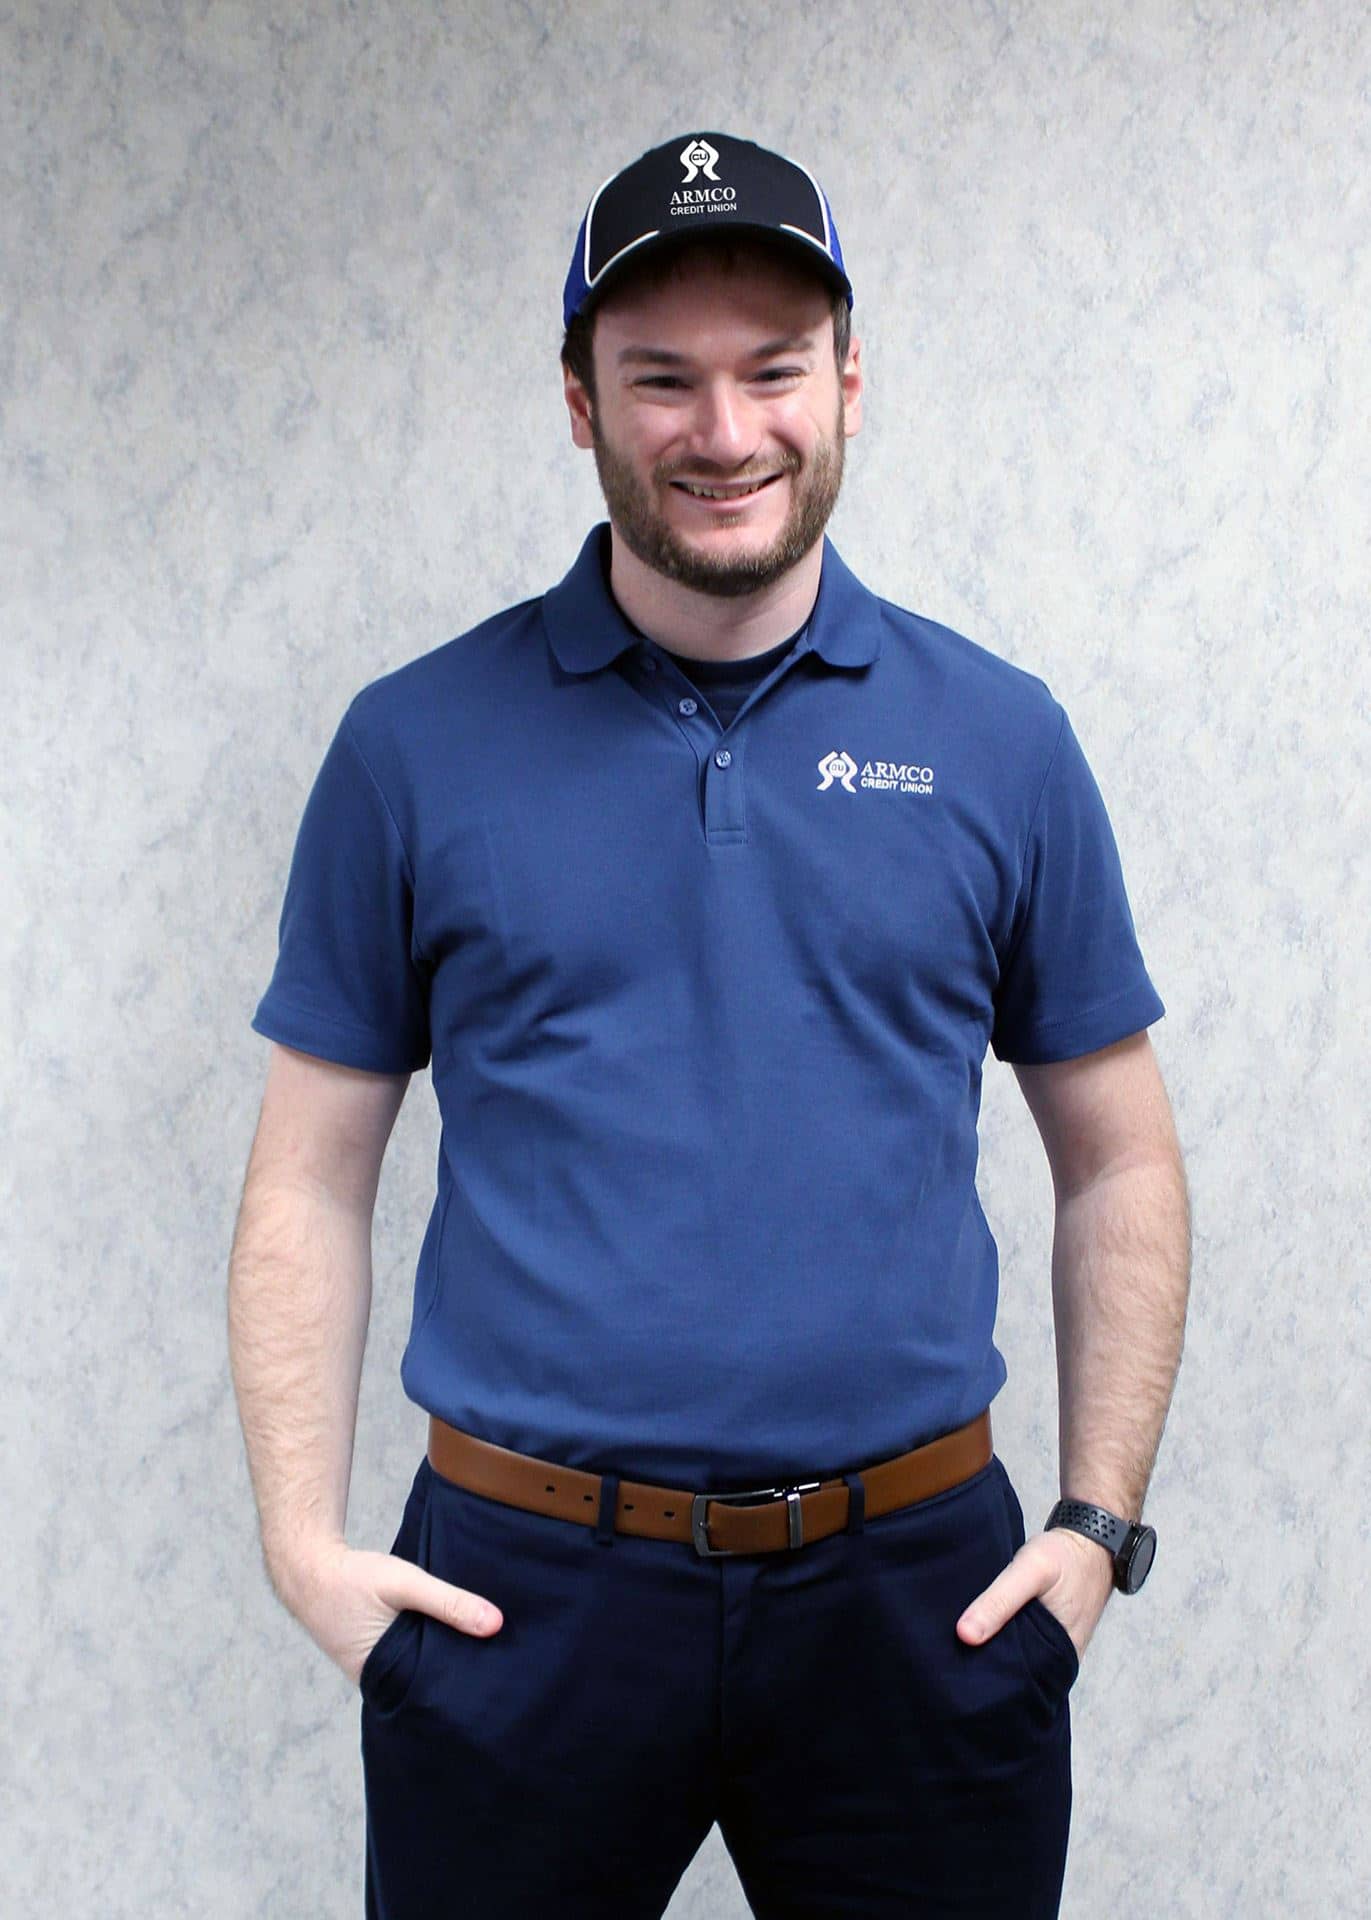 A man wearing the navy Armco CU polo shirt and baseball hat.